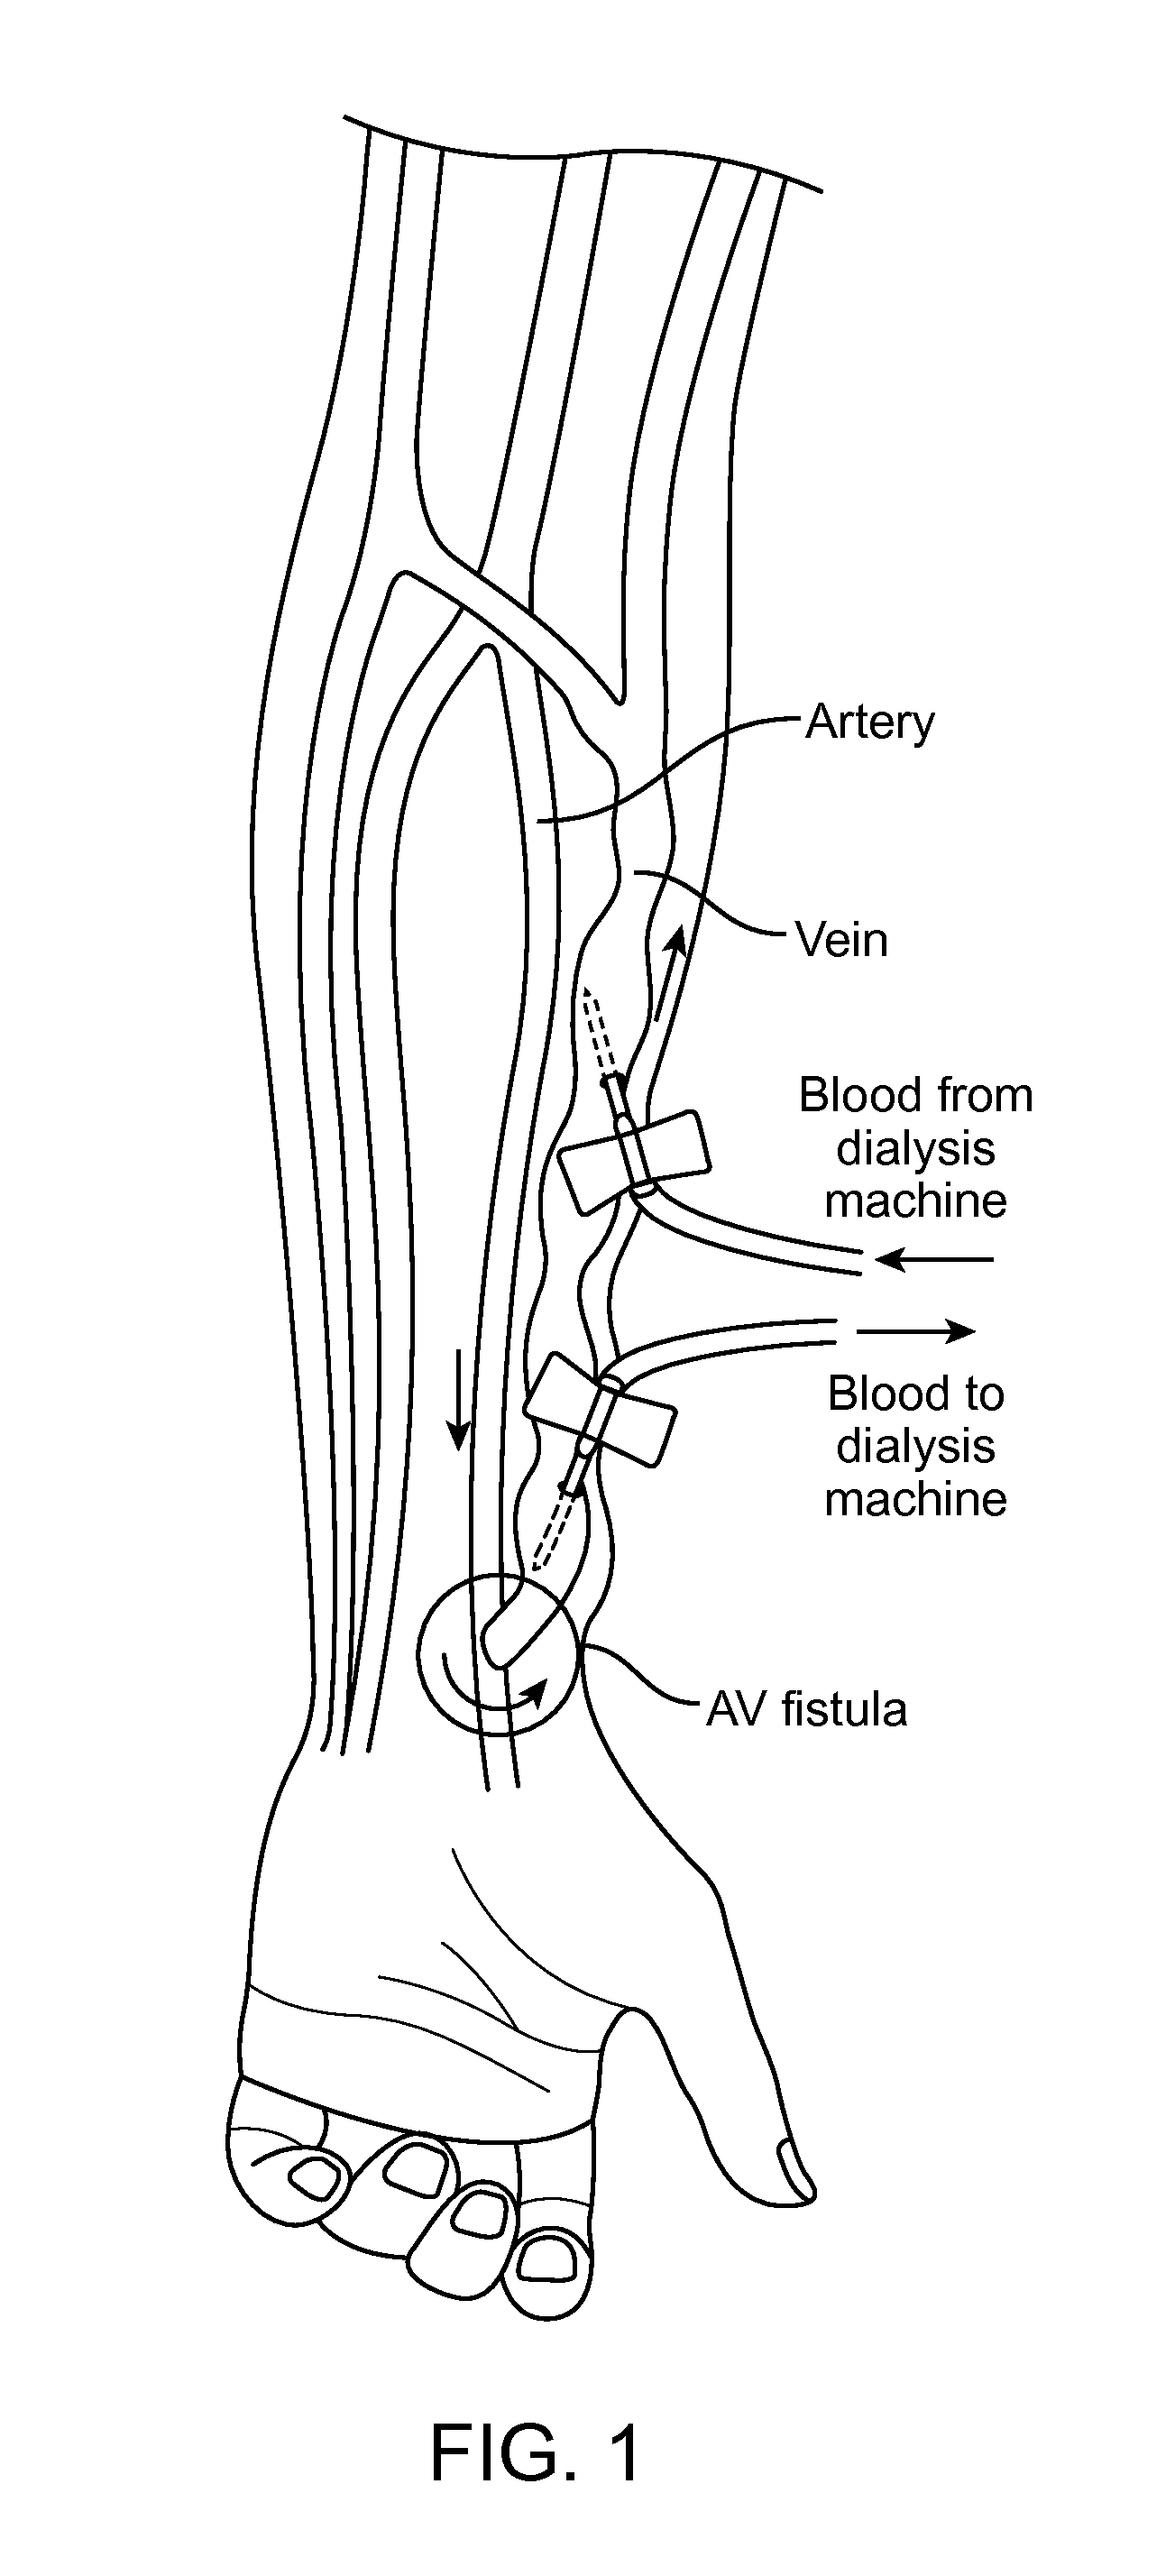 Extravascular devices supporting an arteriovenous fistula